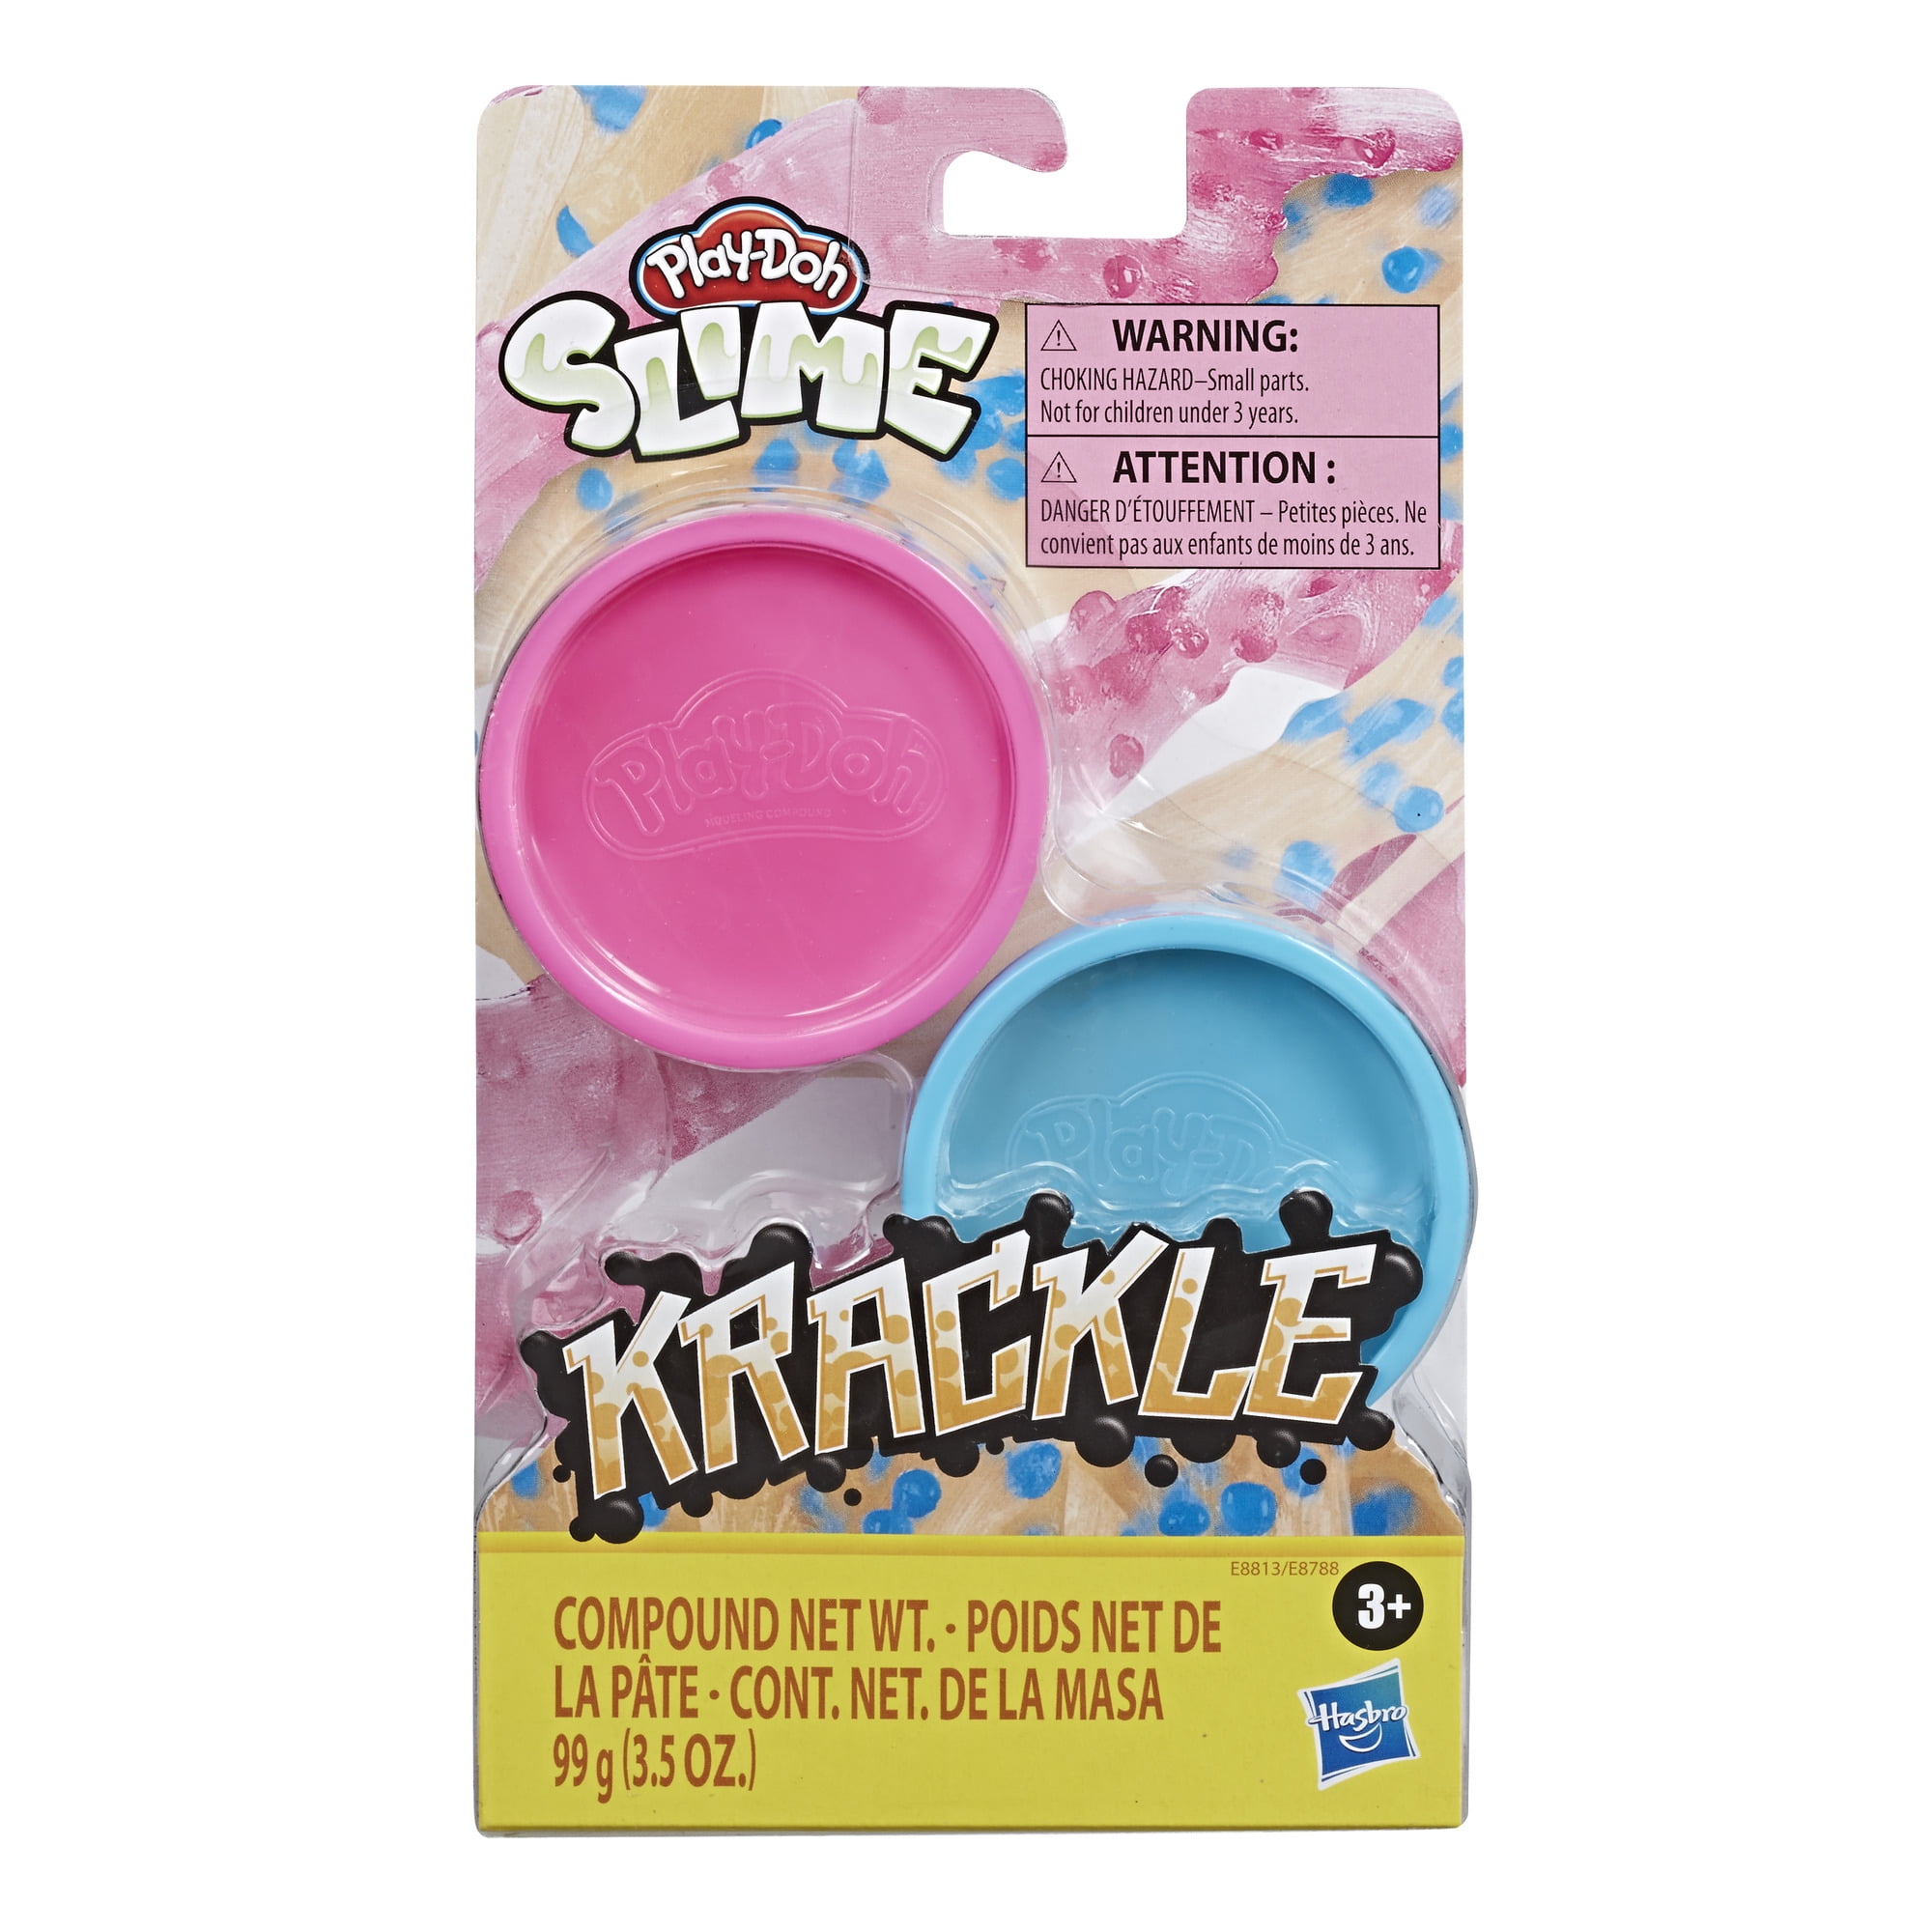 Play-Doh Krackle Slime Blue and Pink 2-Pack of Slime Compound with Beads for 